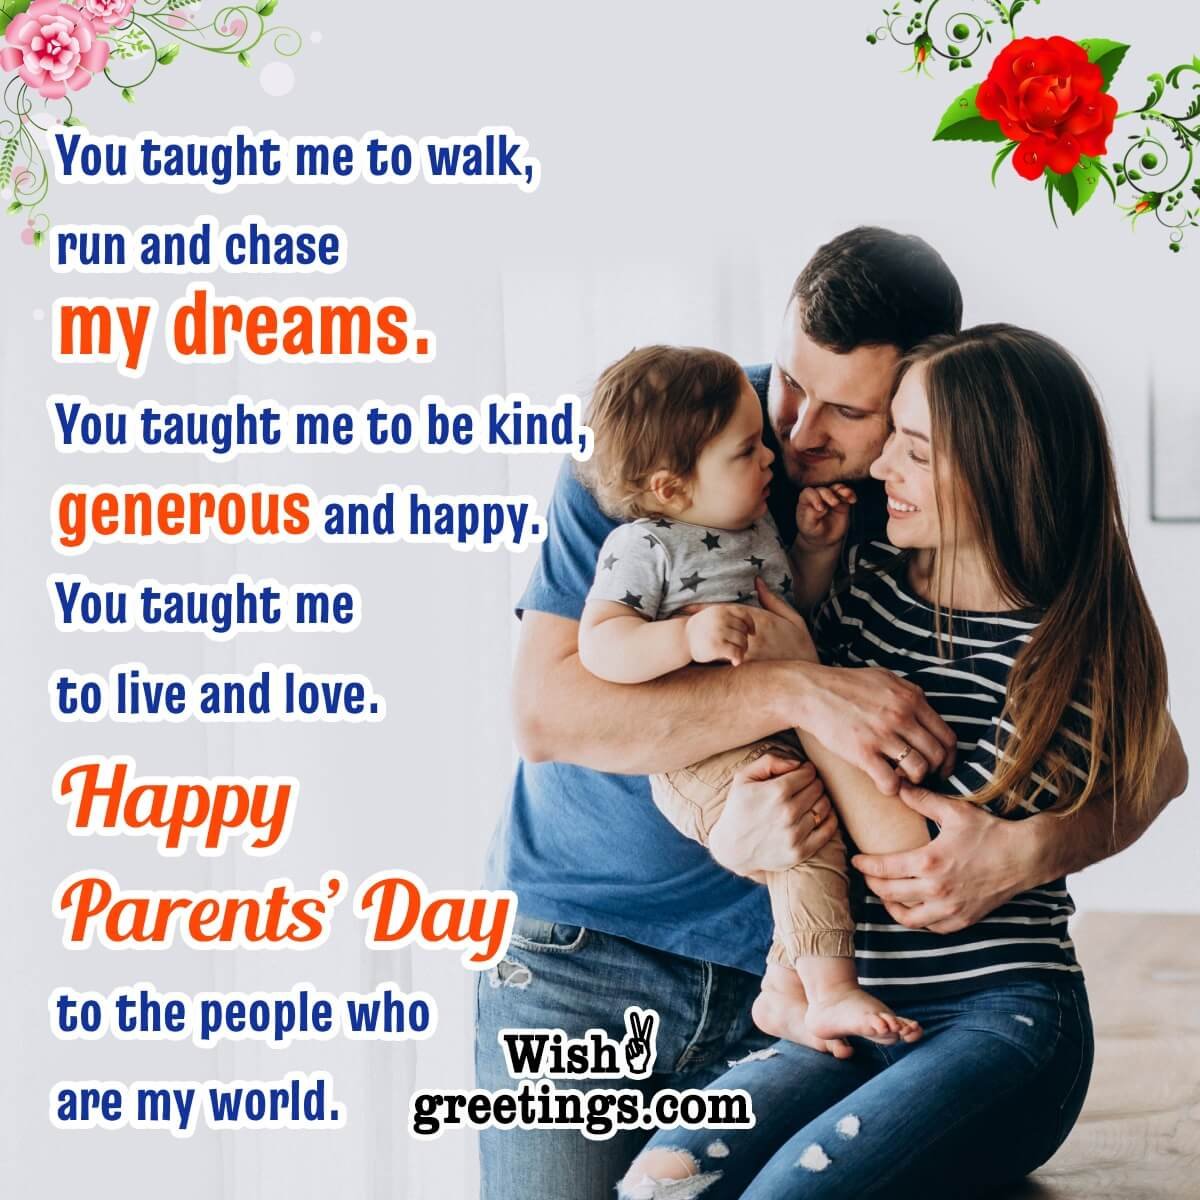 Happy Parents Day Wishes Messages